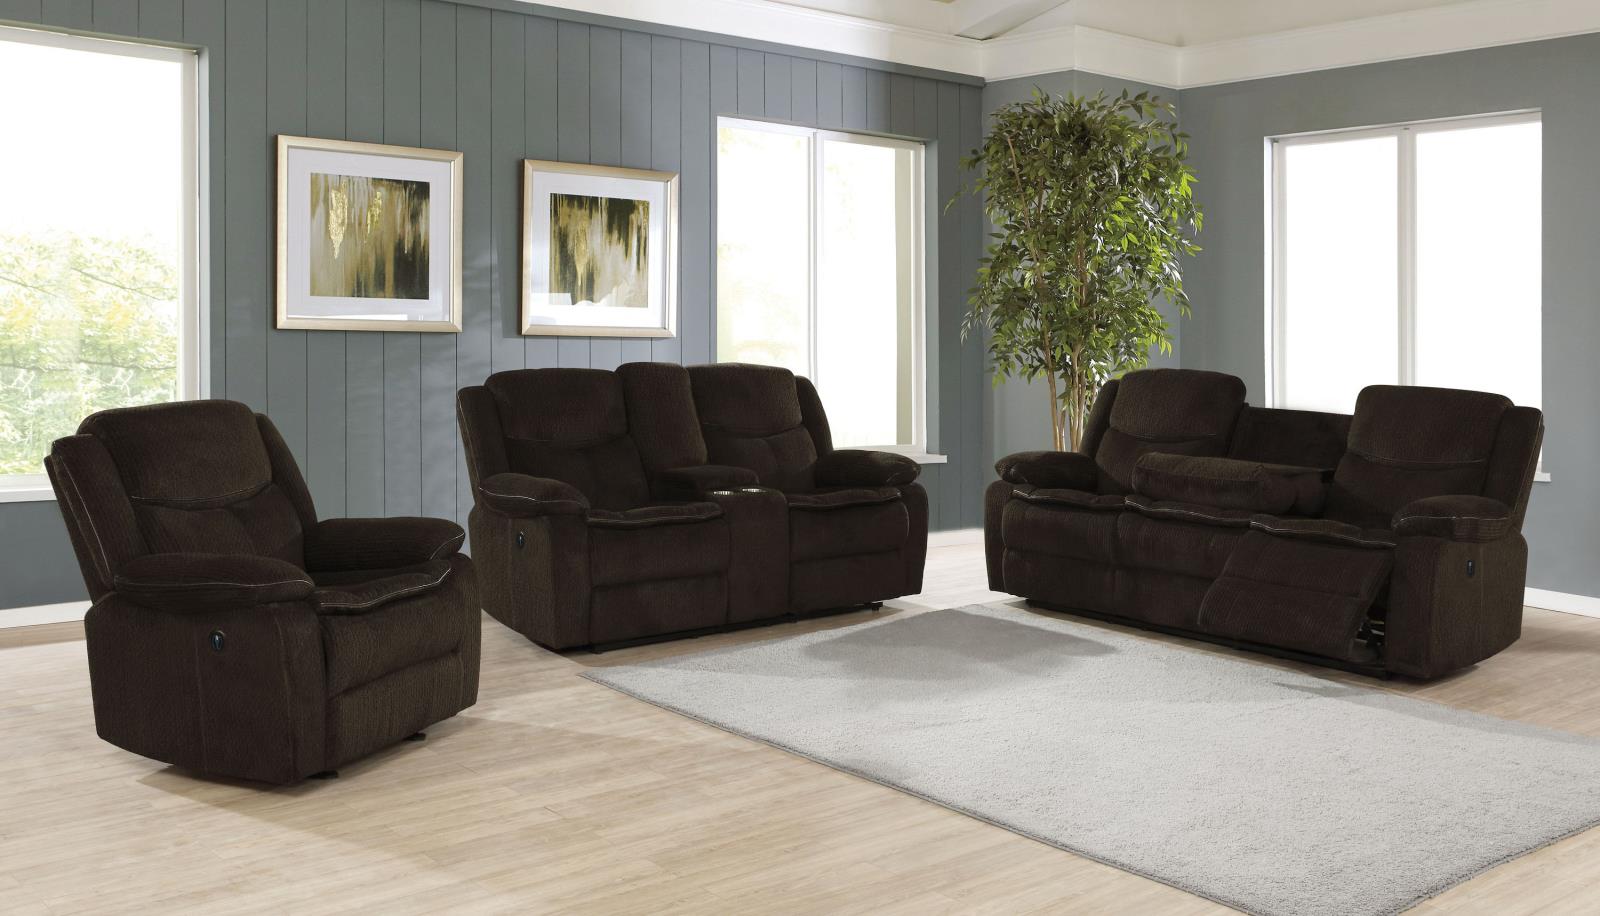 Jennings Upholstered Power Glider Recliner Brown - What A Room